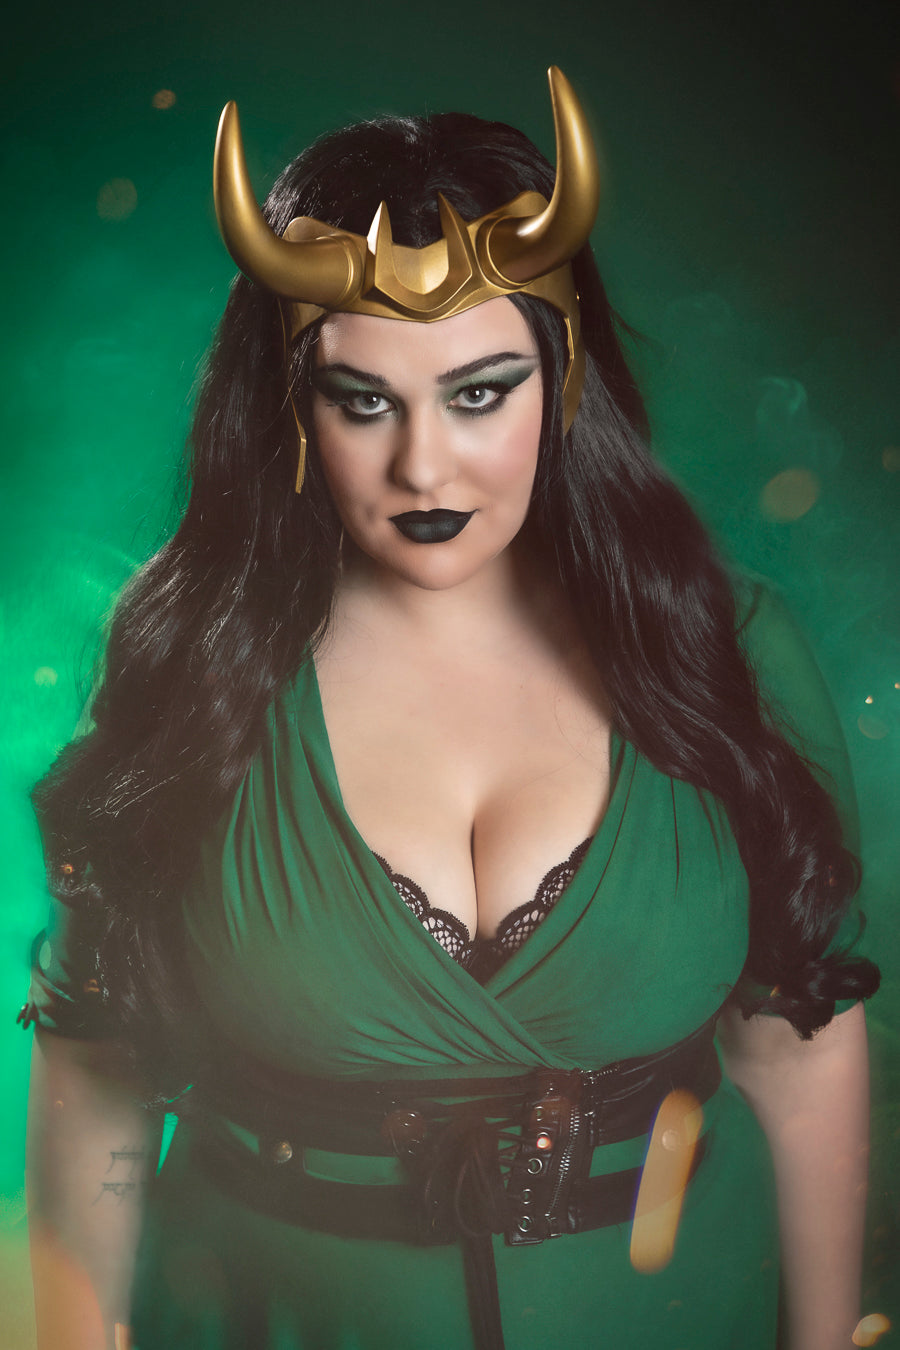 Loki the God of Mischief Costume Hire or Cosplay, plus Makeup and Photography. Proudly by and available at, Little Shop of Horrors Costumery 6/1 Watt Rd Mornington & Melbourne